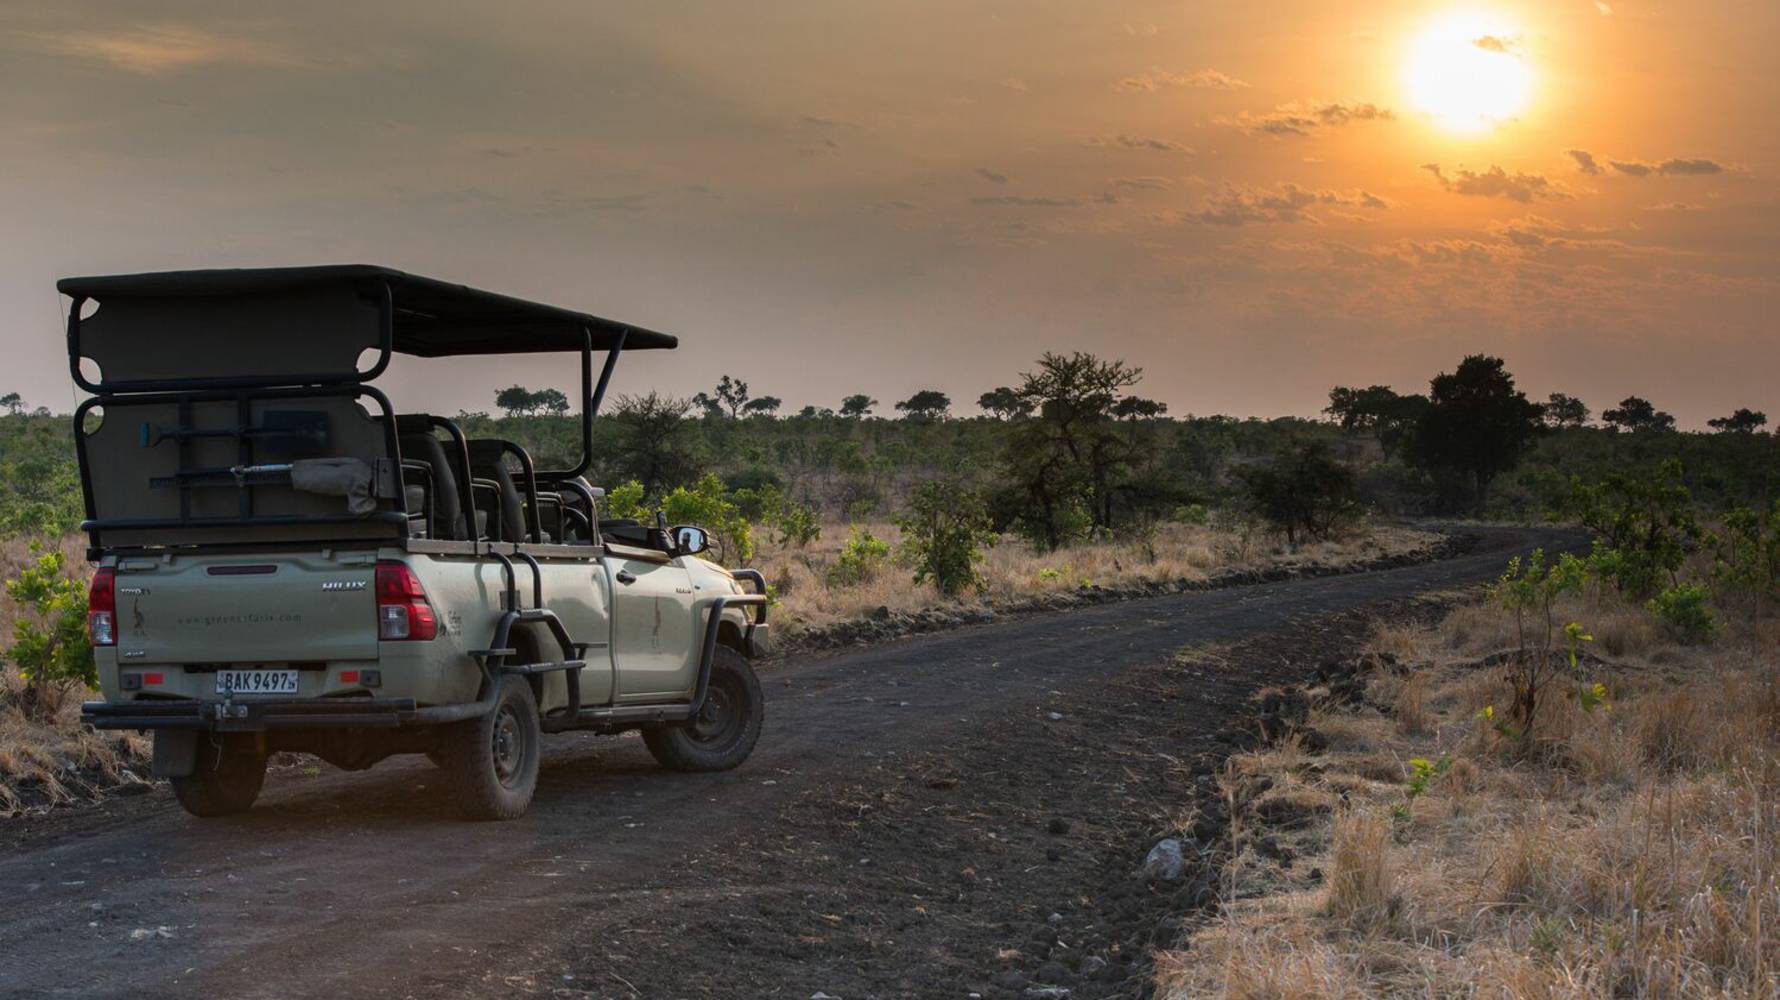 Game_drive_vehicle_and_sunset